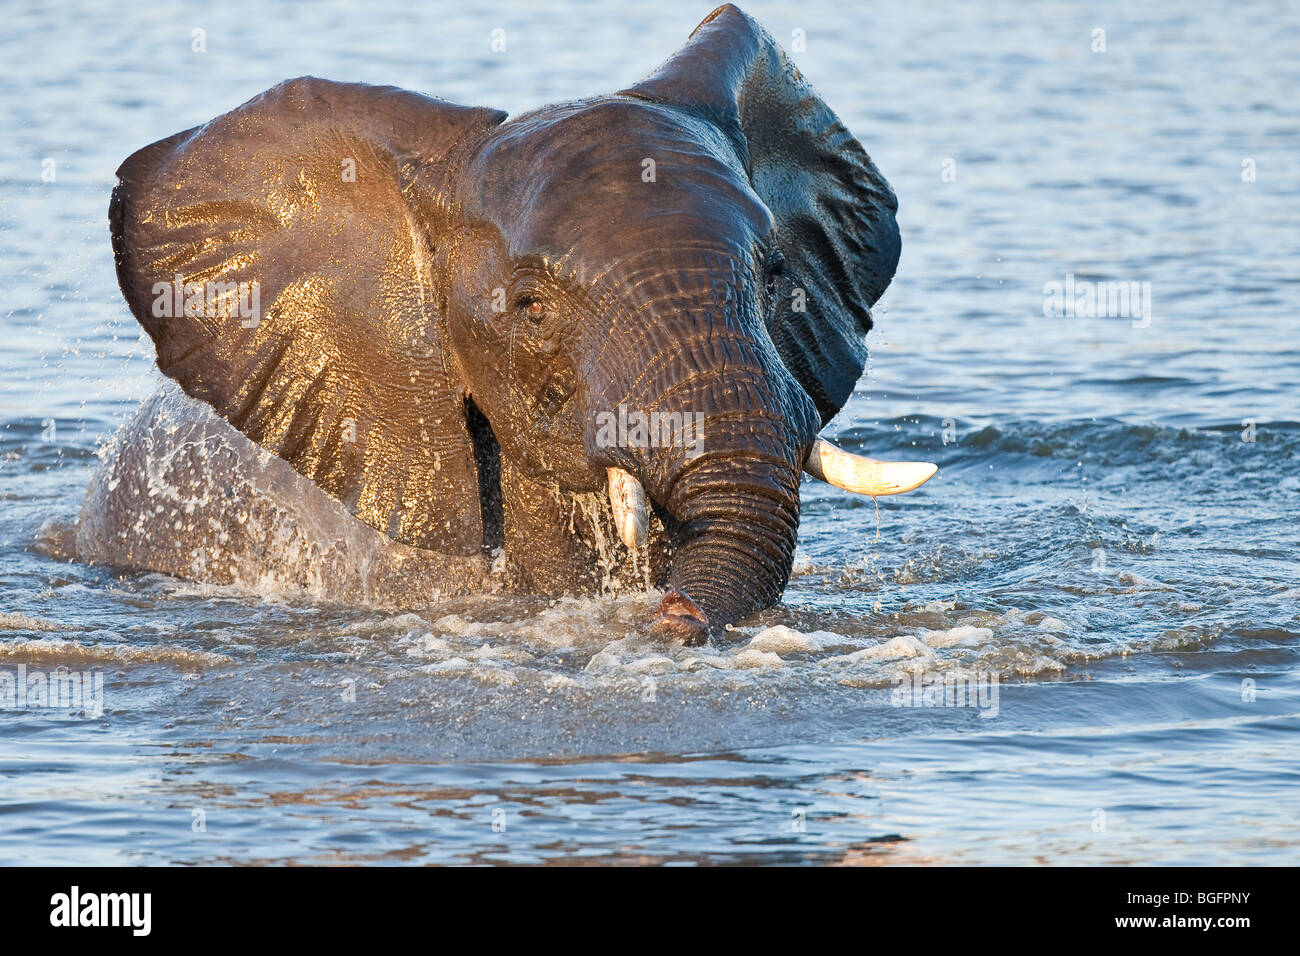 Elephant playing in water Stock Photo